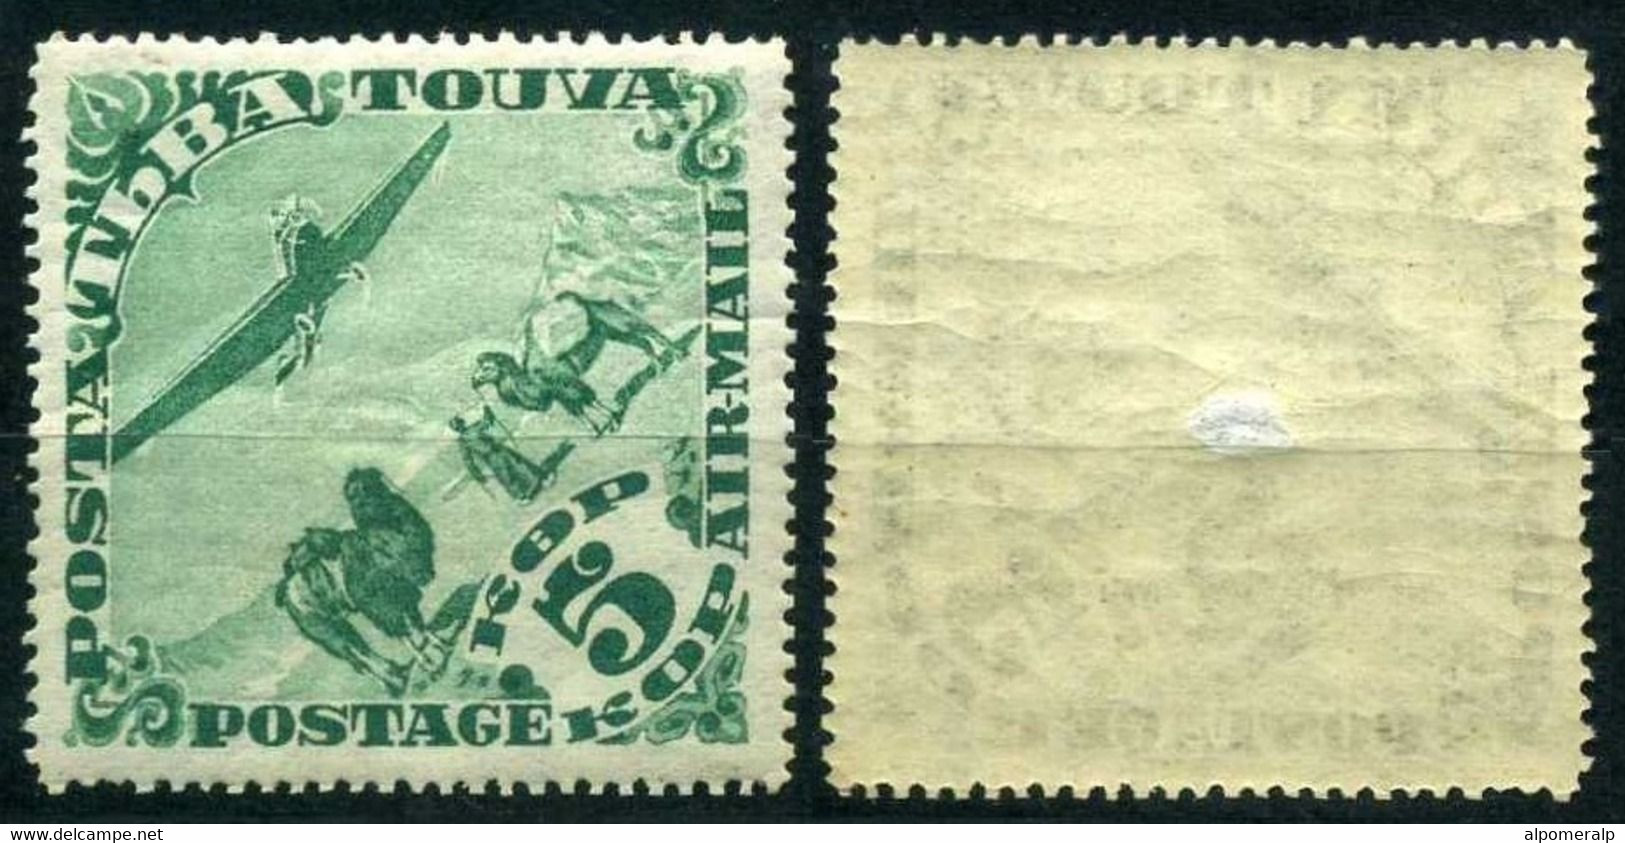 TANNU-TUVA 1934 (*) - Mi. 49-57 (I & II), Postage Stamps: Plane Over Landscapes With Animals | Air Post - Toeva